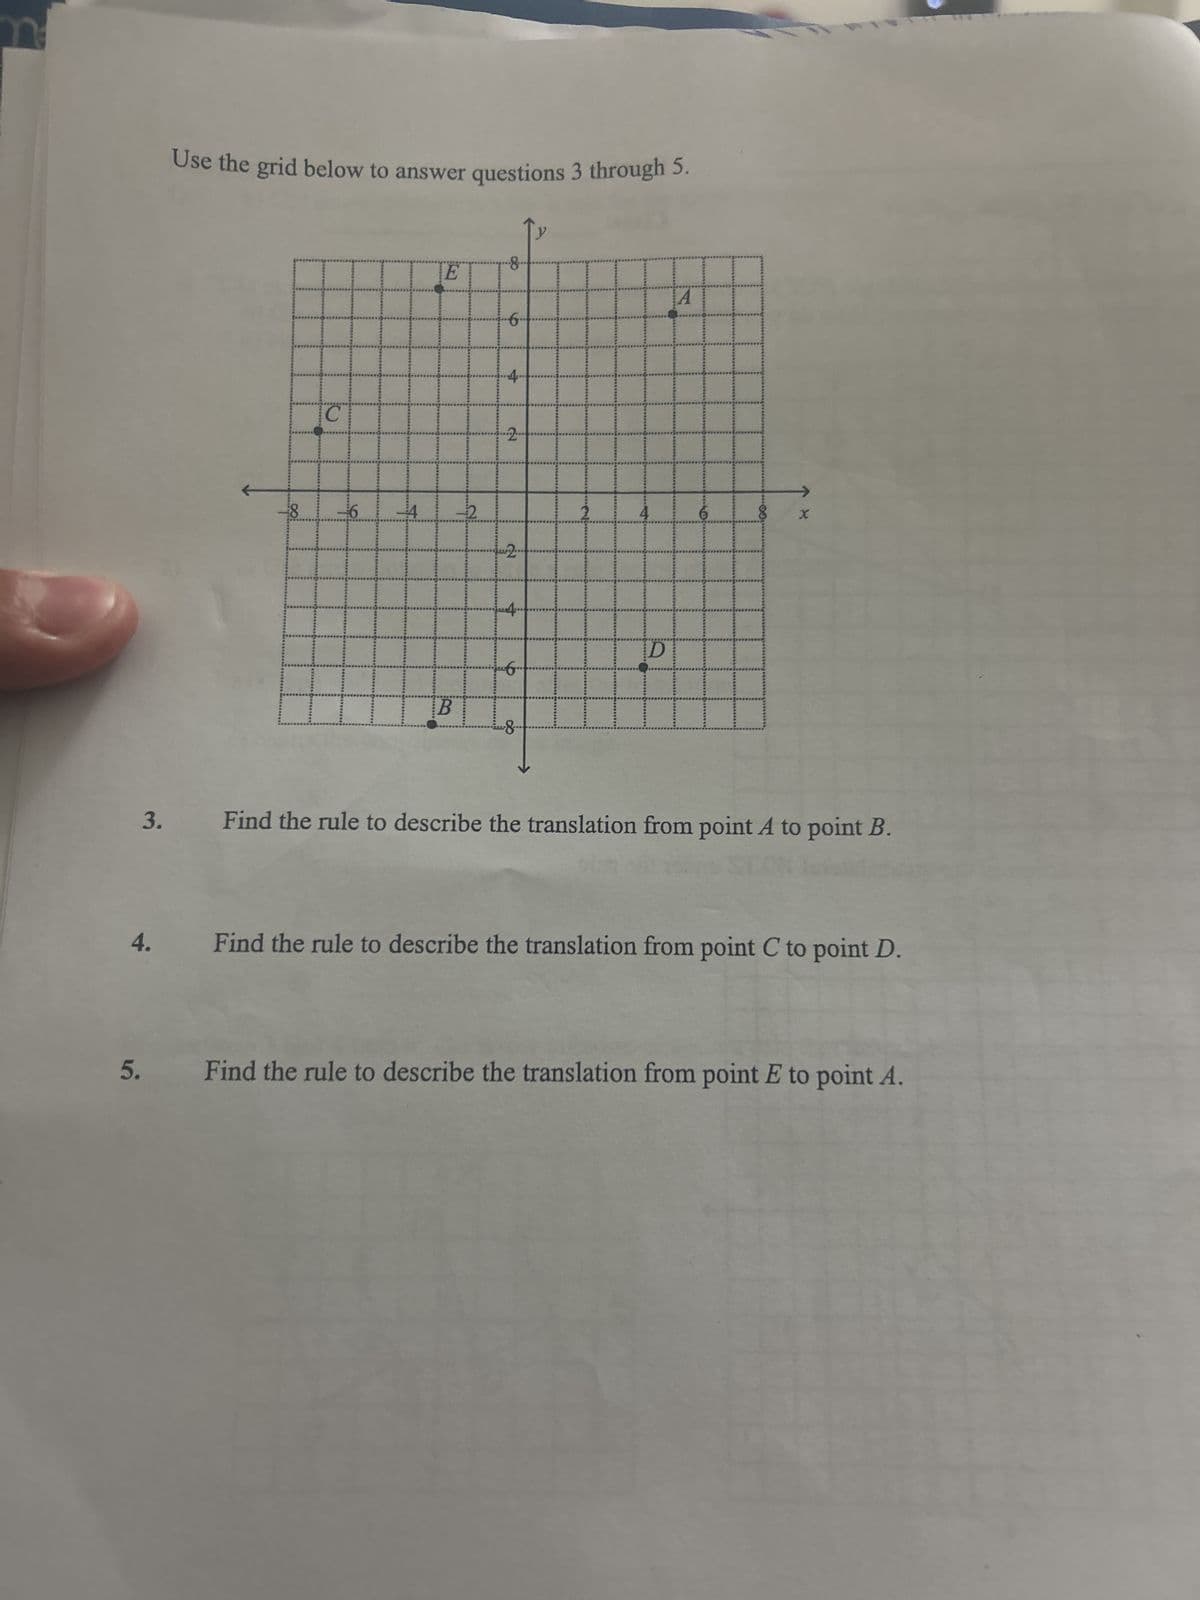 n
3.
Use the grid below to answer questions 3 through 5.
8
C
....
6
4
E
B
...
8
6.
4.
2
2.
4...
8.
D
A
X
Find the rule to describe the translation from point A to point B.
4. Find the rule to describe the translation from point C to point D.
5. Find the rule to describe the translation from point E to point A.